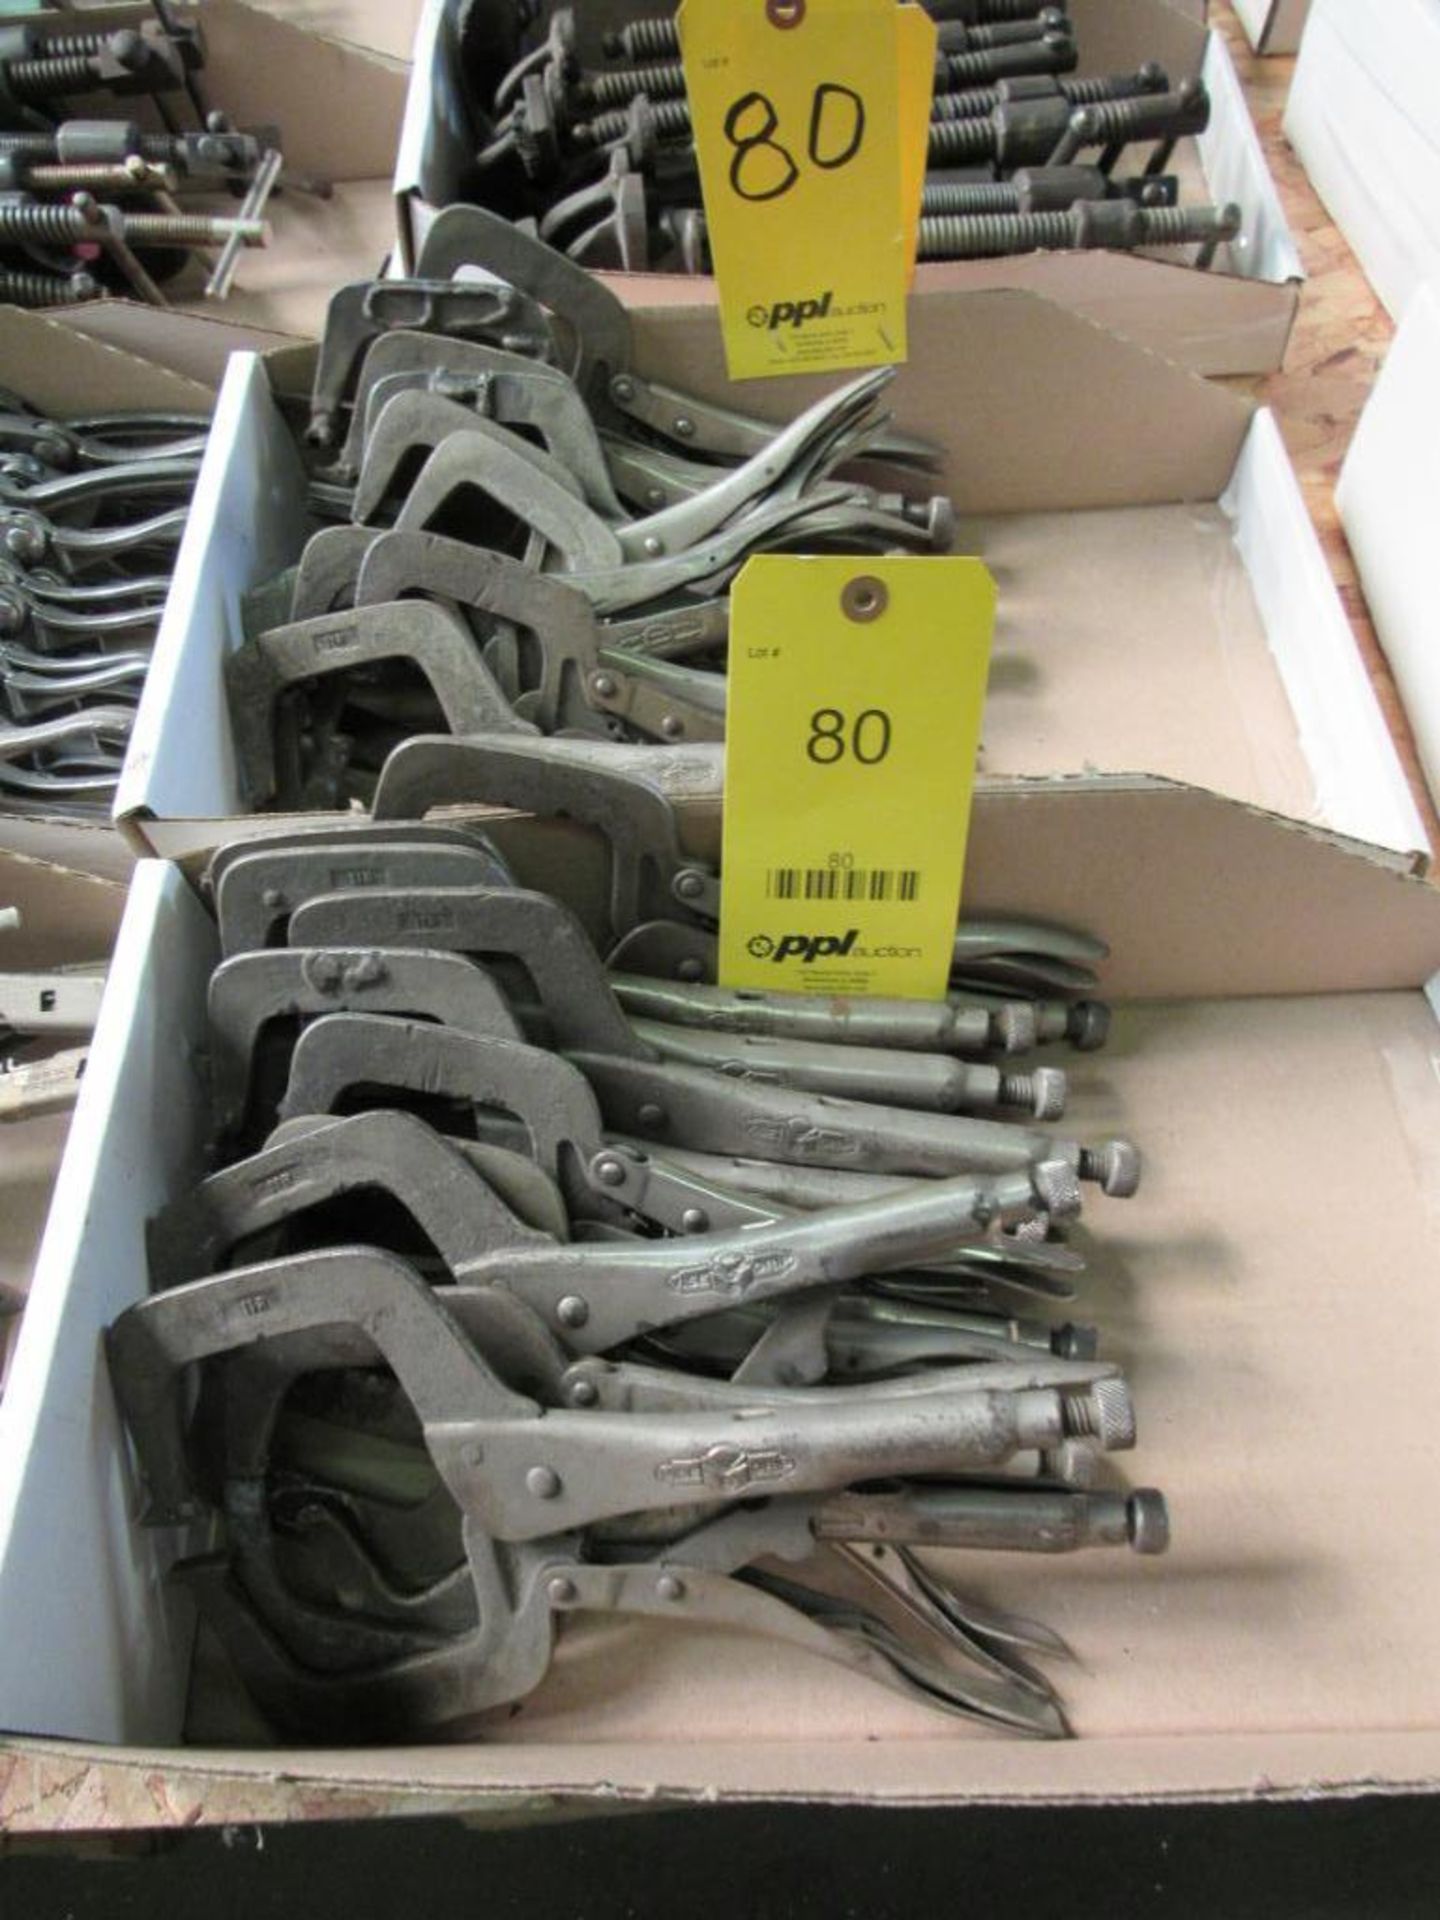 LOT: Approx. (24) Locking Plier Clamps in (2) Boxes